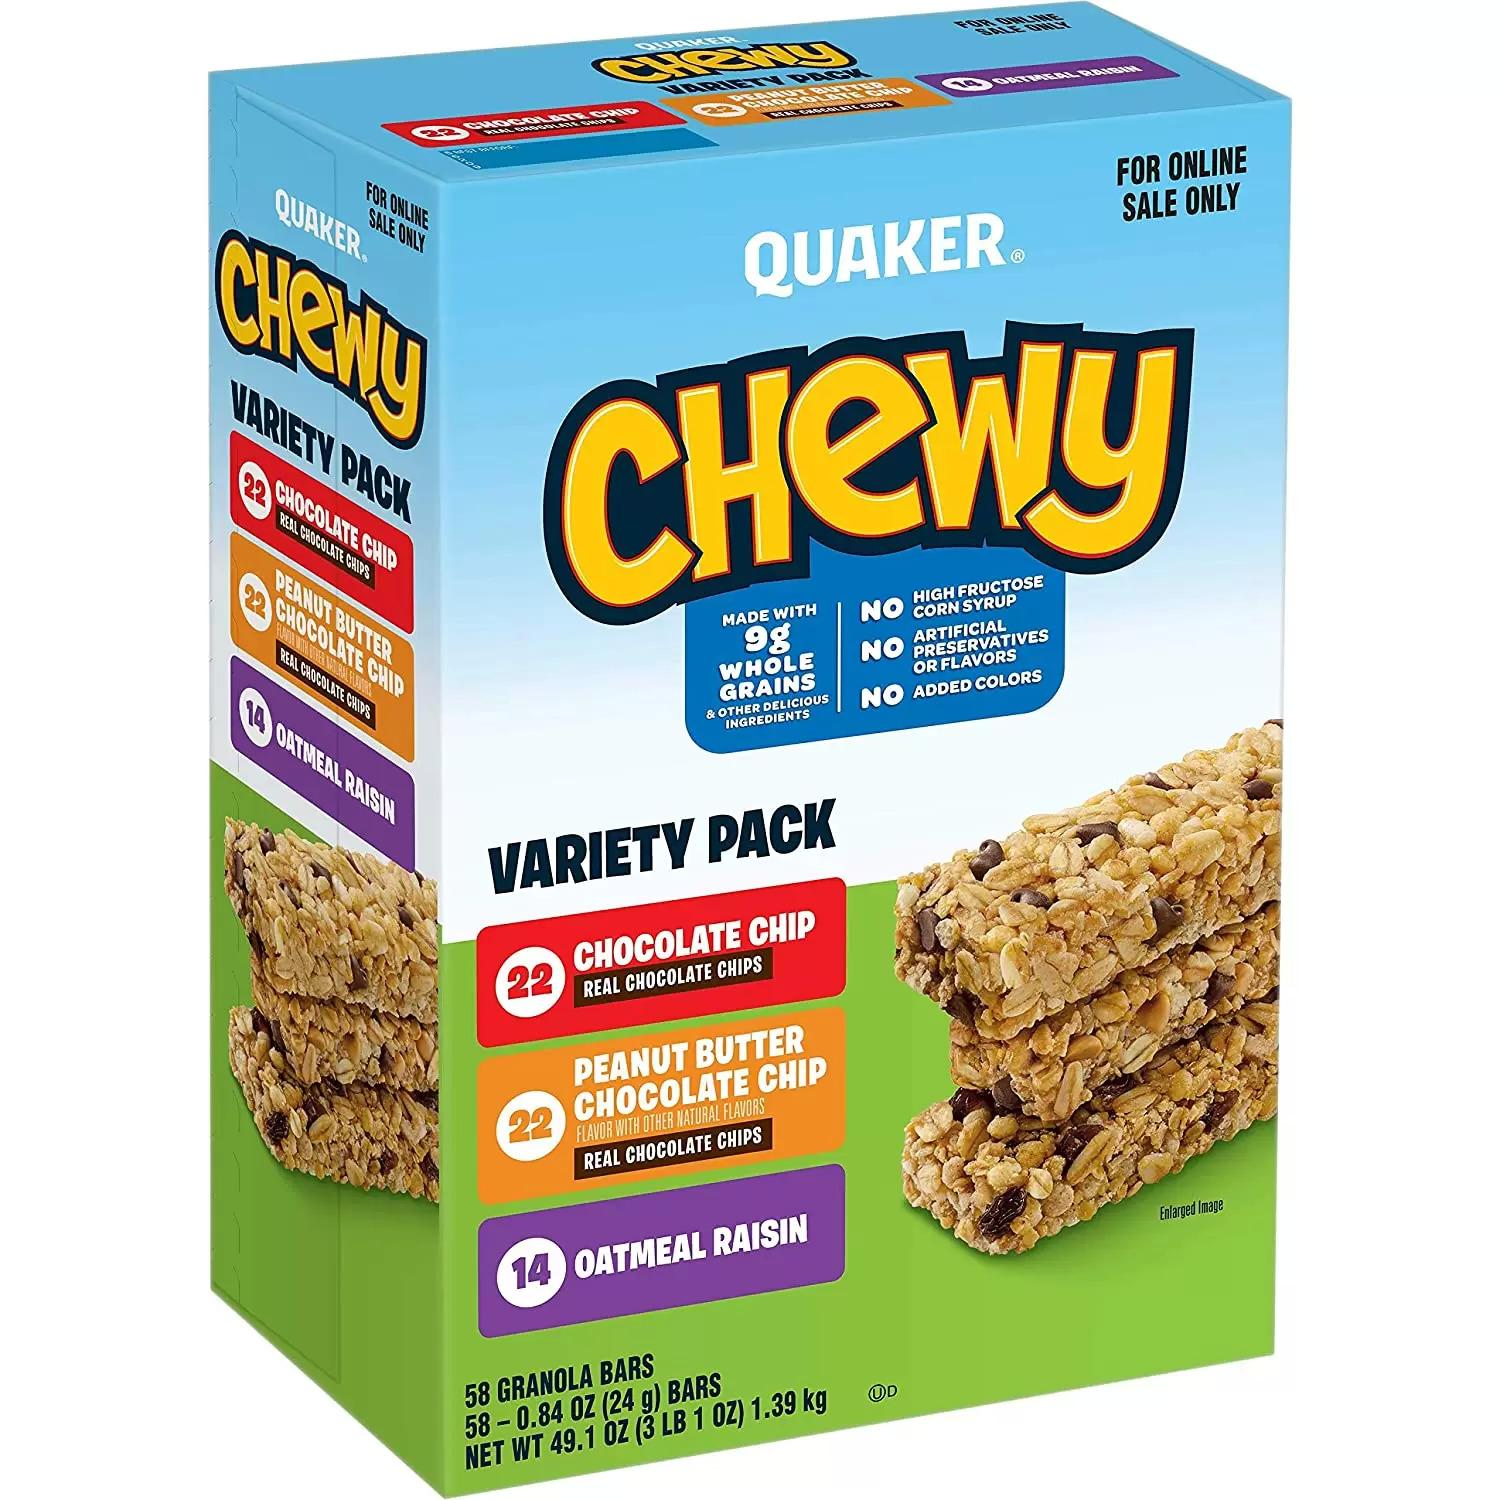 Quaker Chewy Granola Bars Variety 58 Pack for $10.62 Shipped